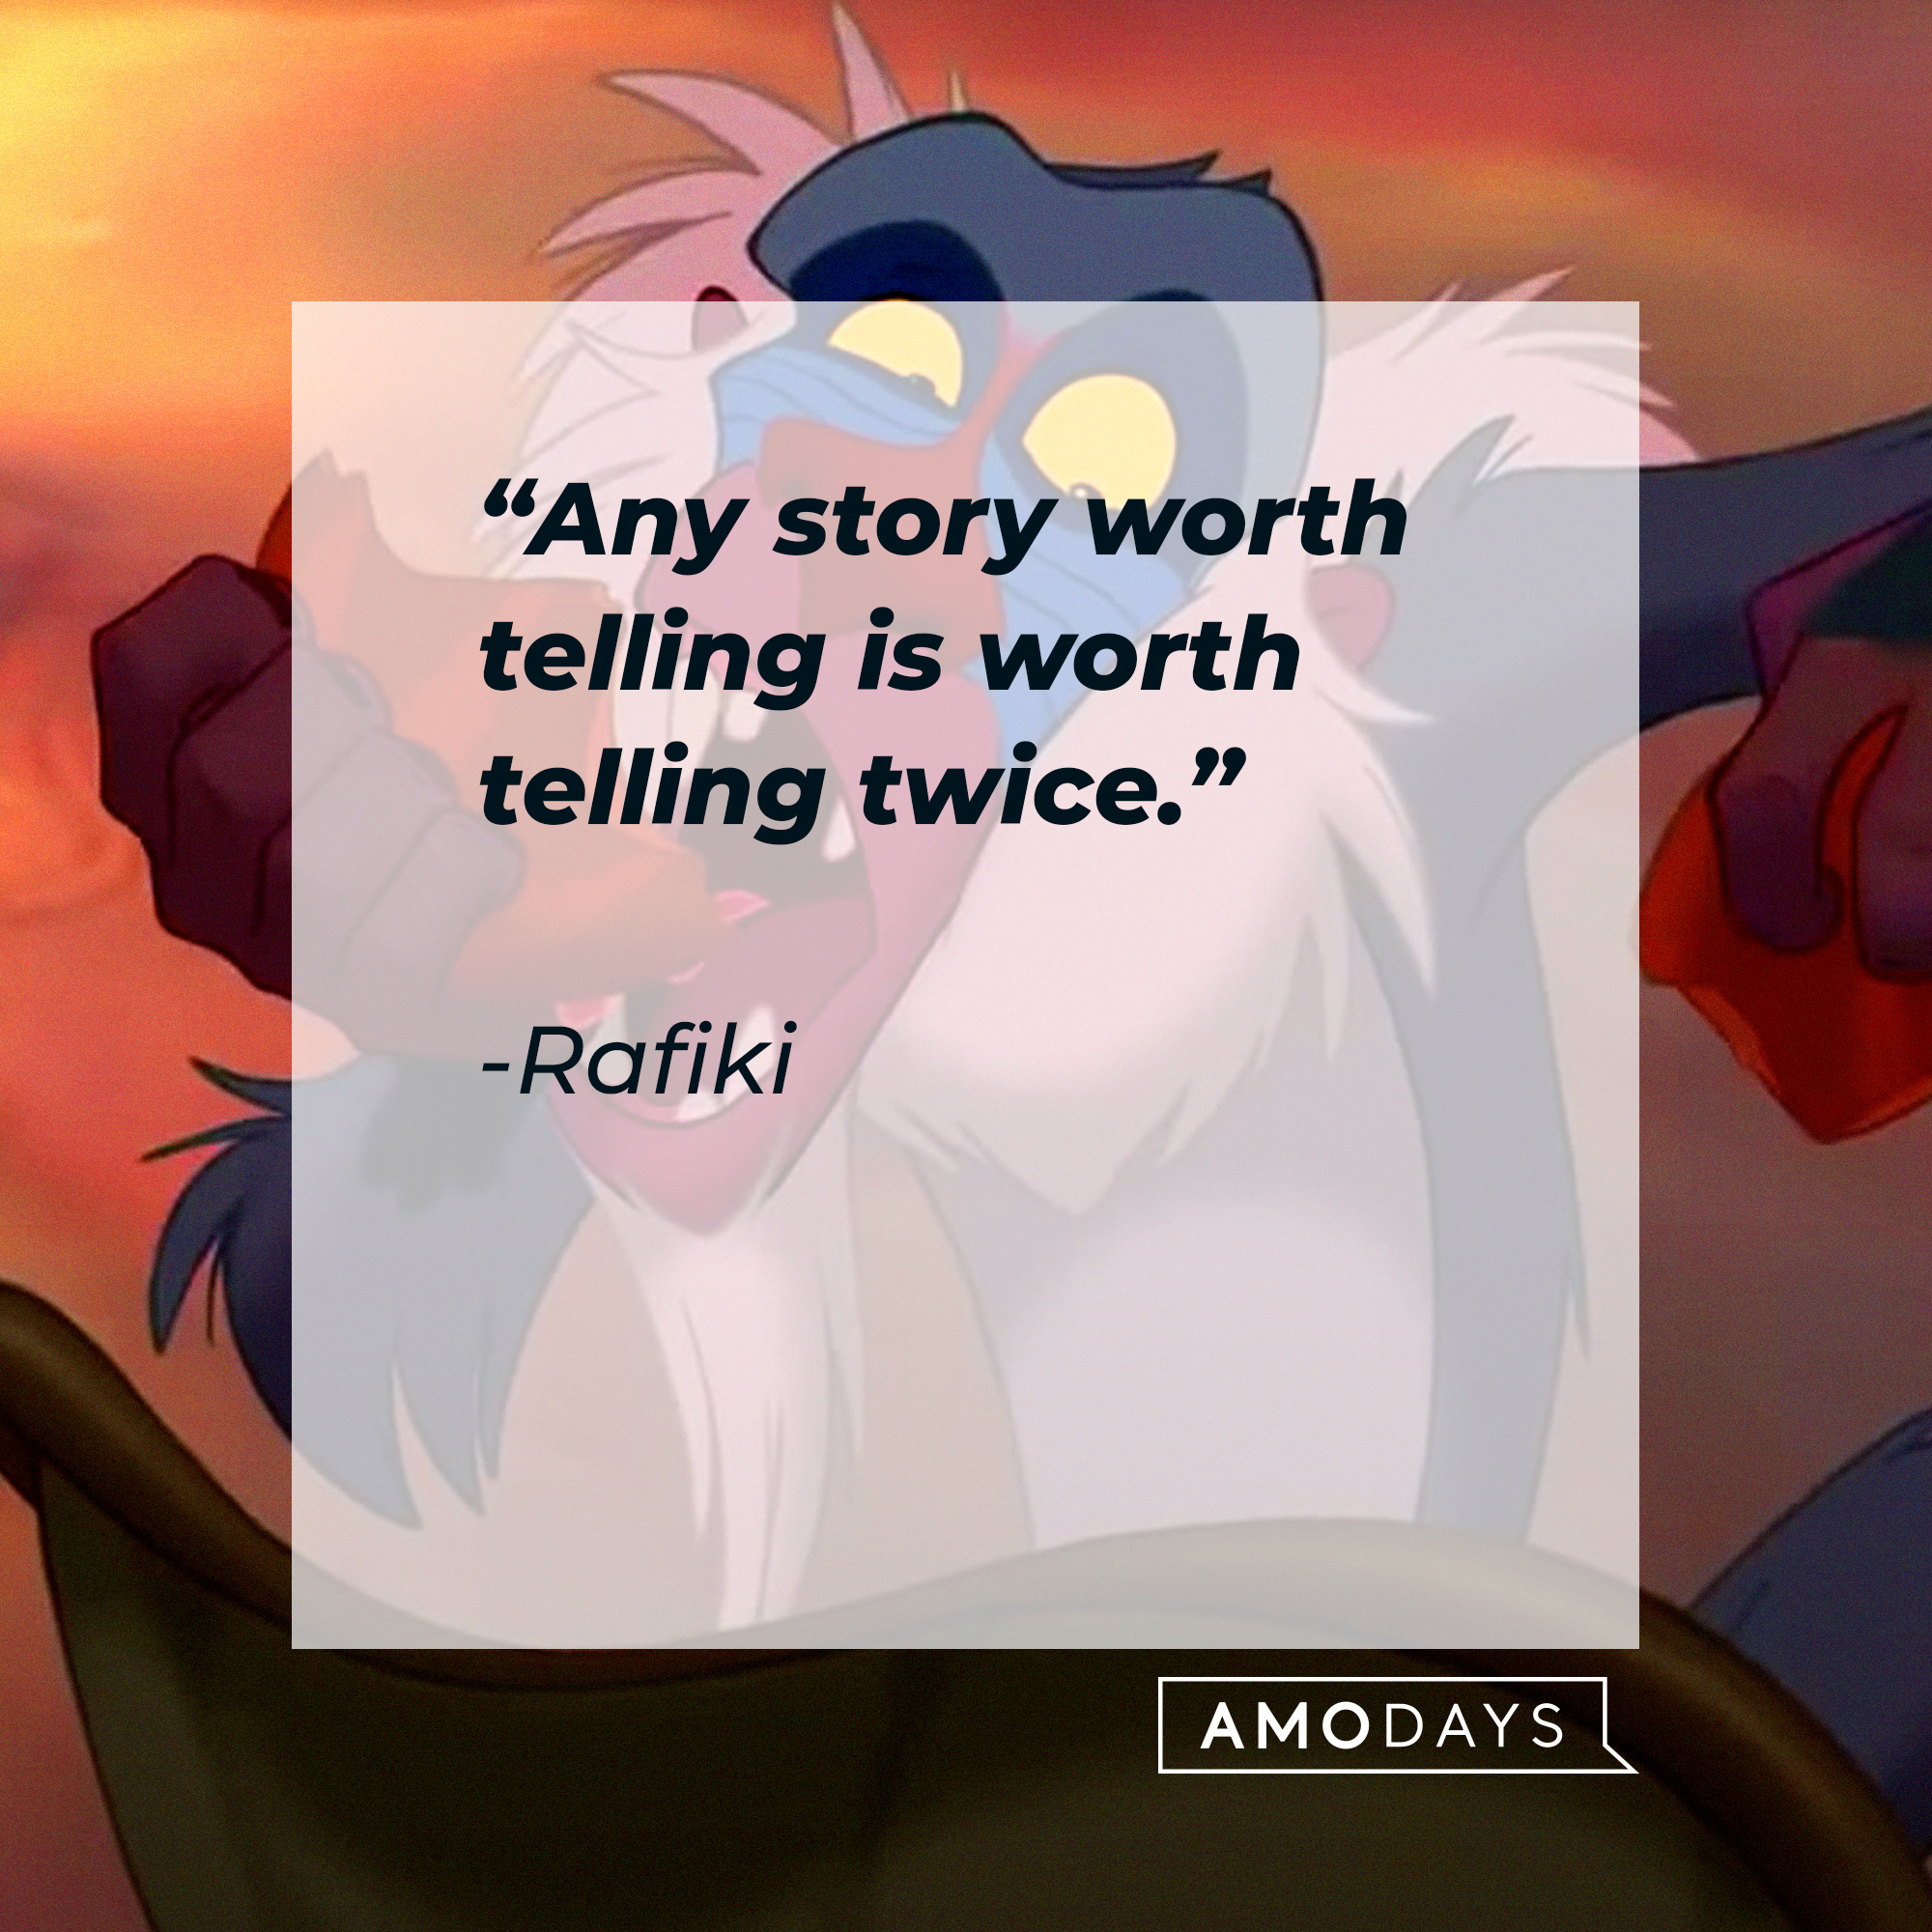 Rafiki's quote: "Any story worth telling is worth telling twice." | Source: Facebook/DisneyTheLionKing